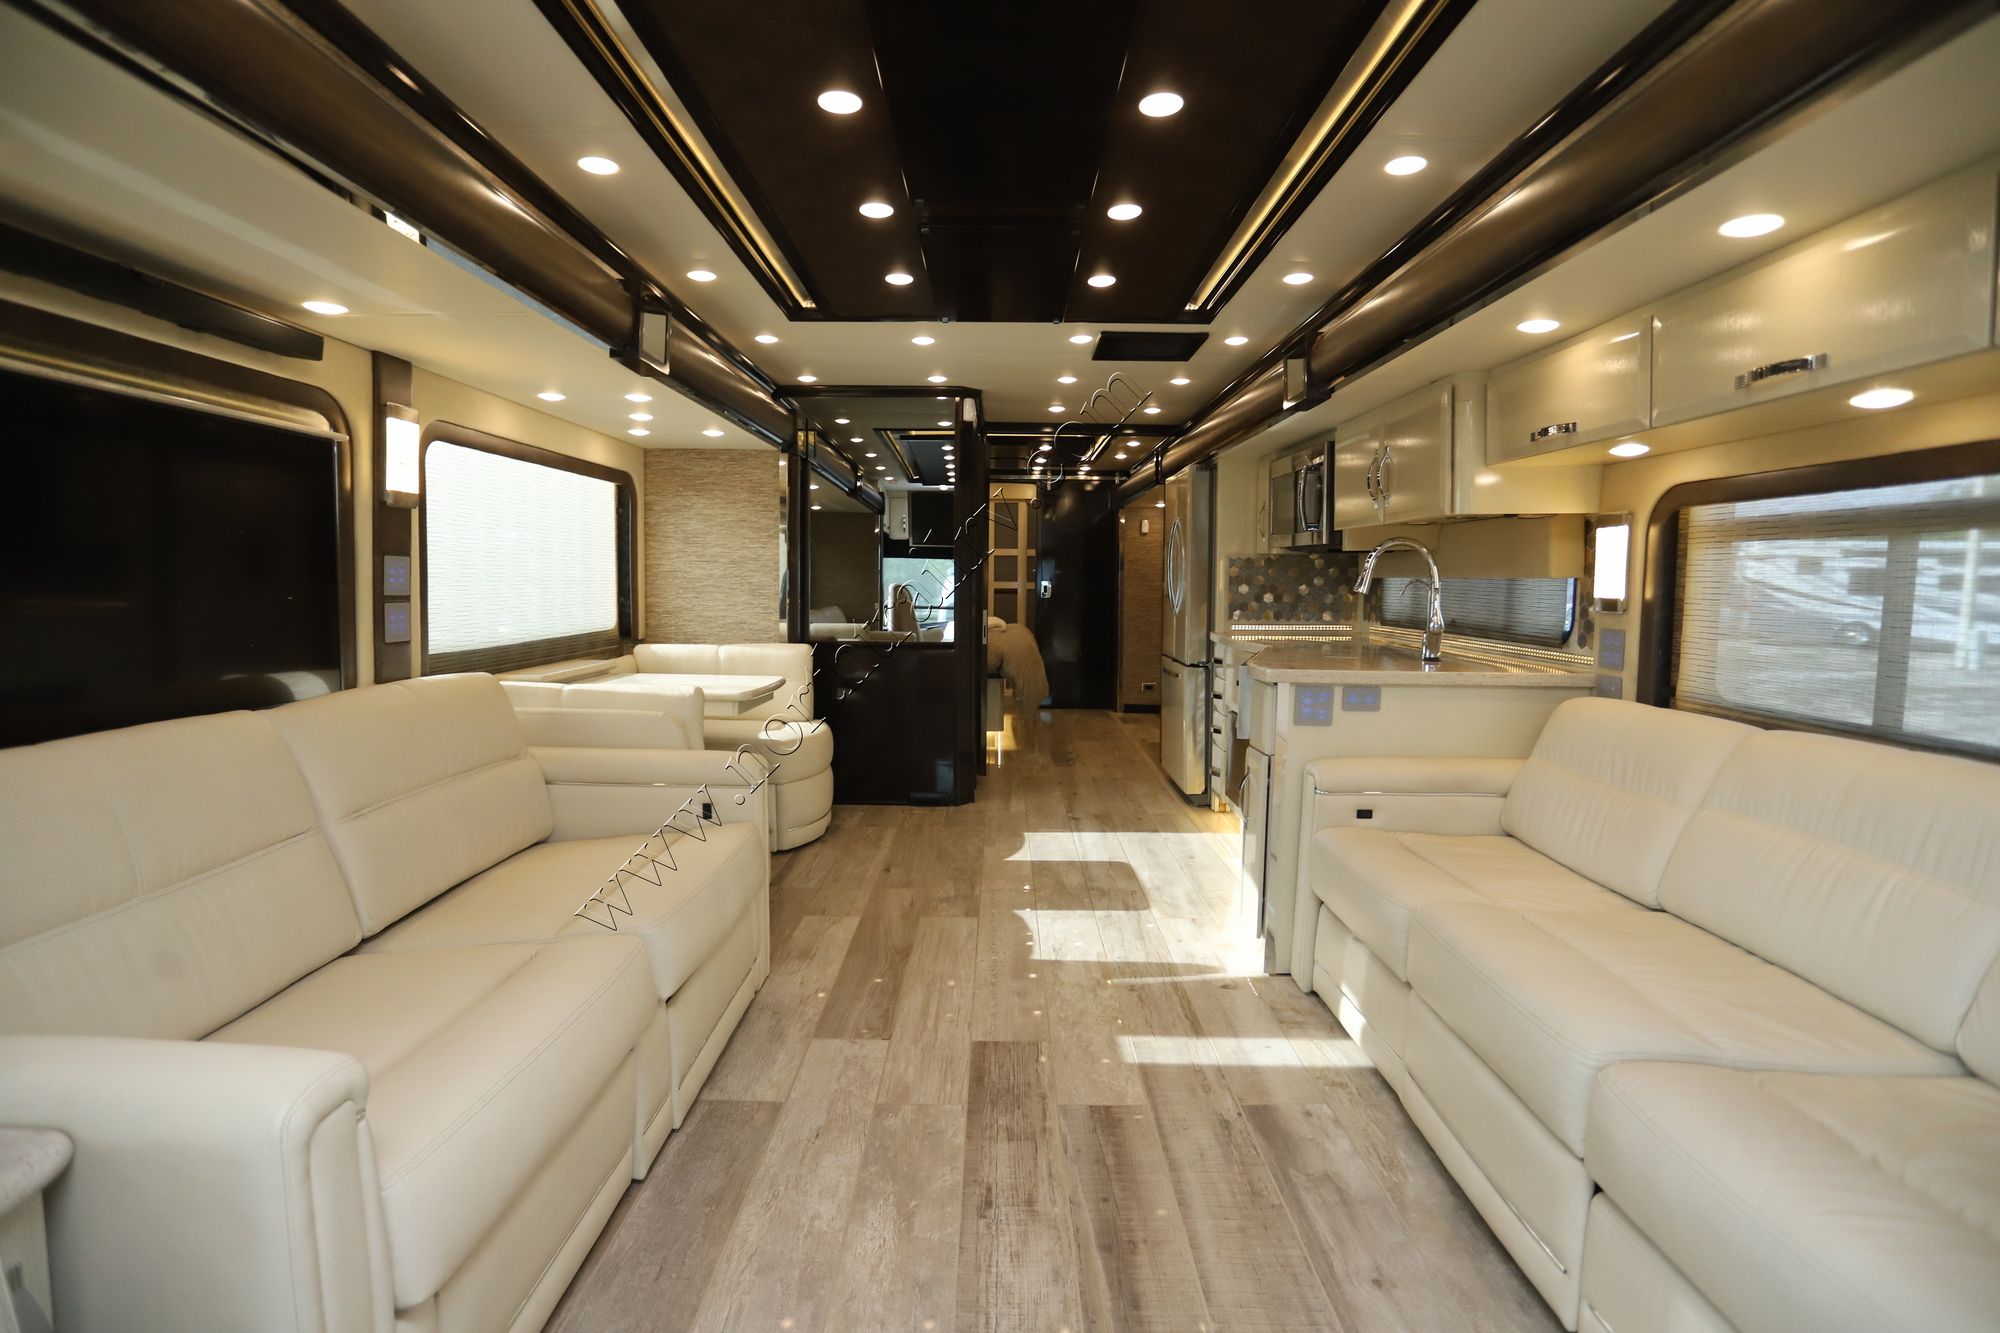 Used 2019 Newmar King Aire 4533 Class A  For Sale